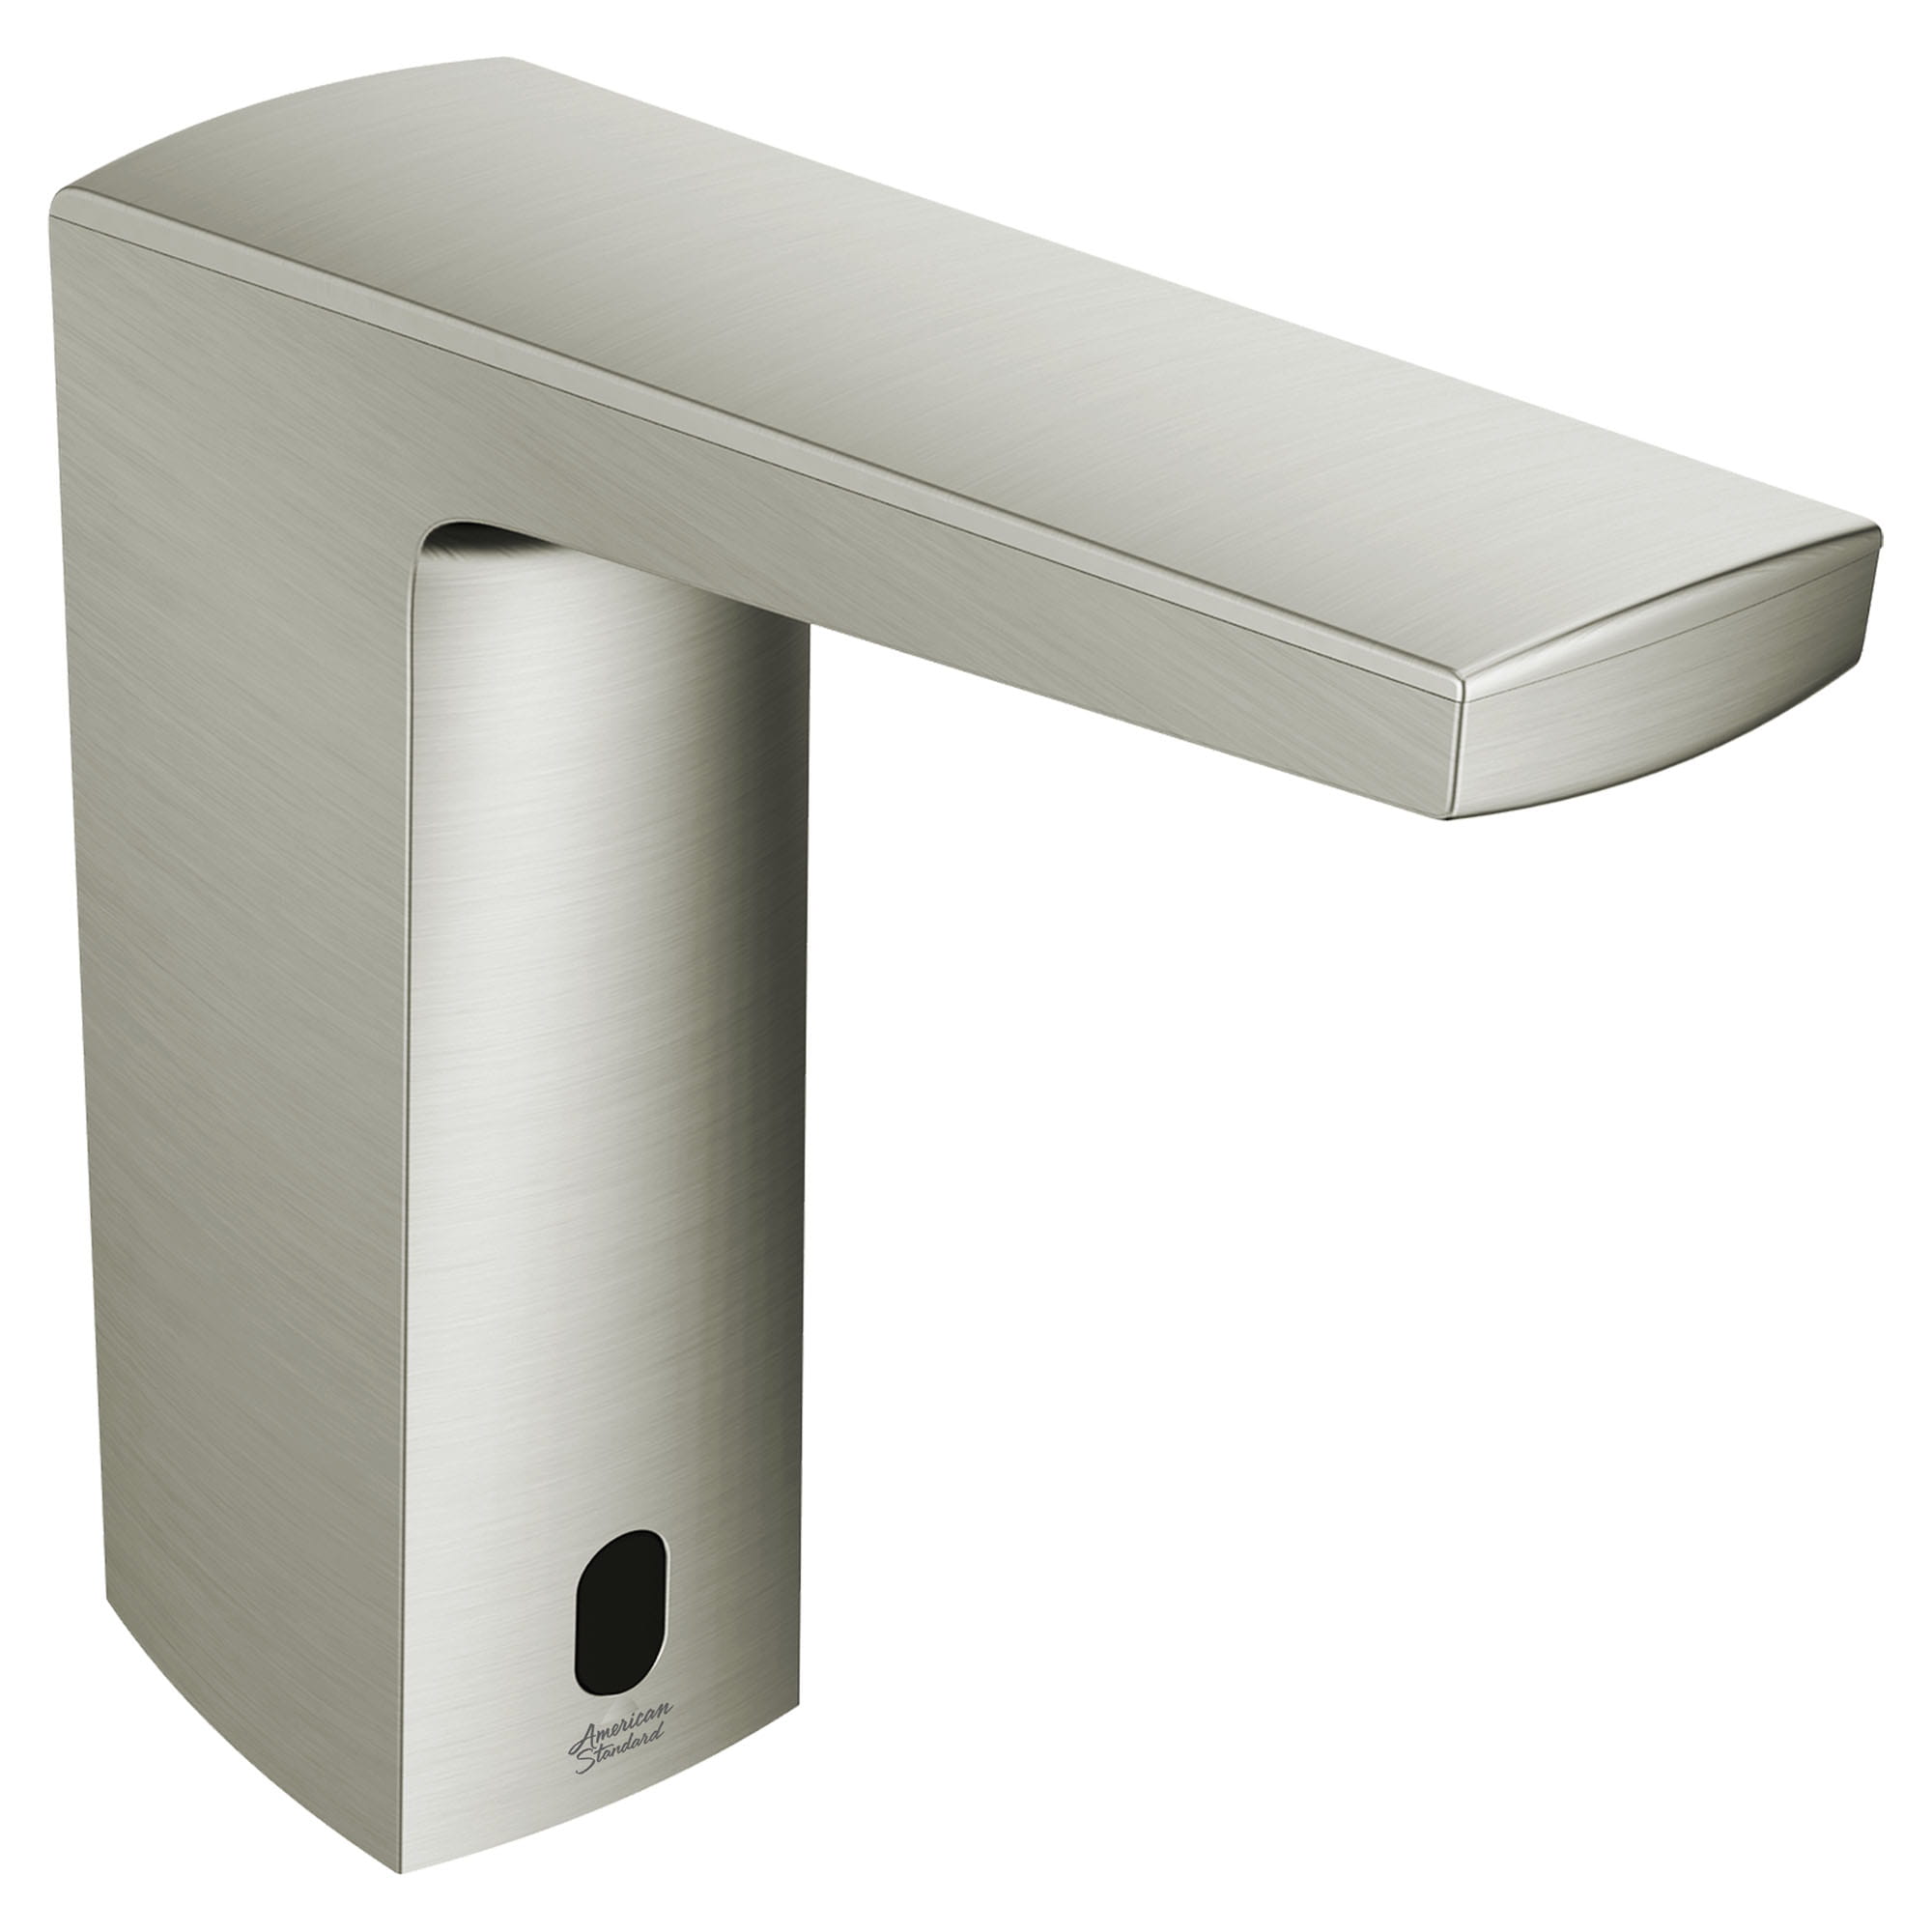 Paradigm Selectronic Touchless Faucet Battery Powered With SmarTherm Safety Shut Off  Plus  ADM 035 gpm 13 Lpm   BRUSHED NICKEL